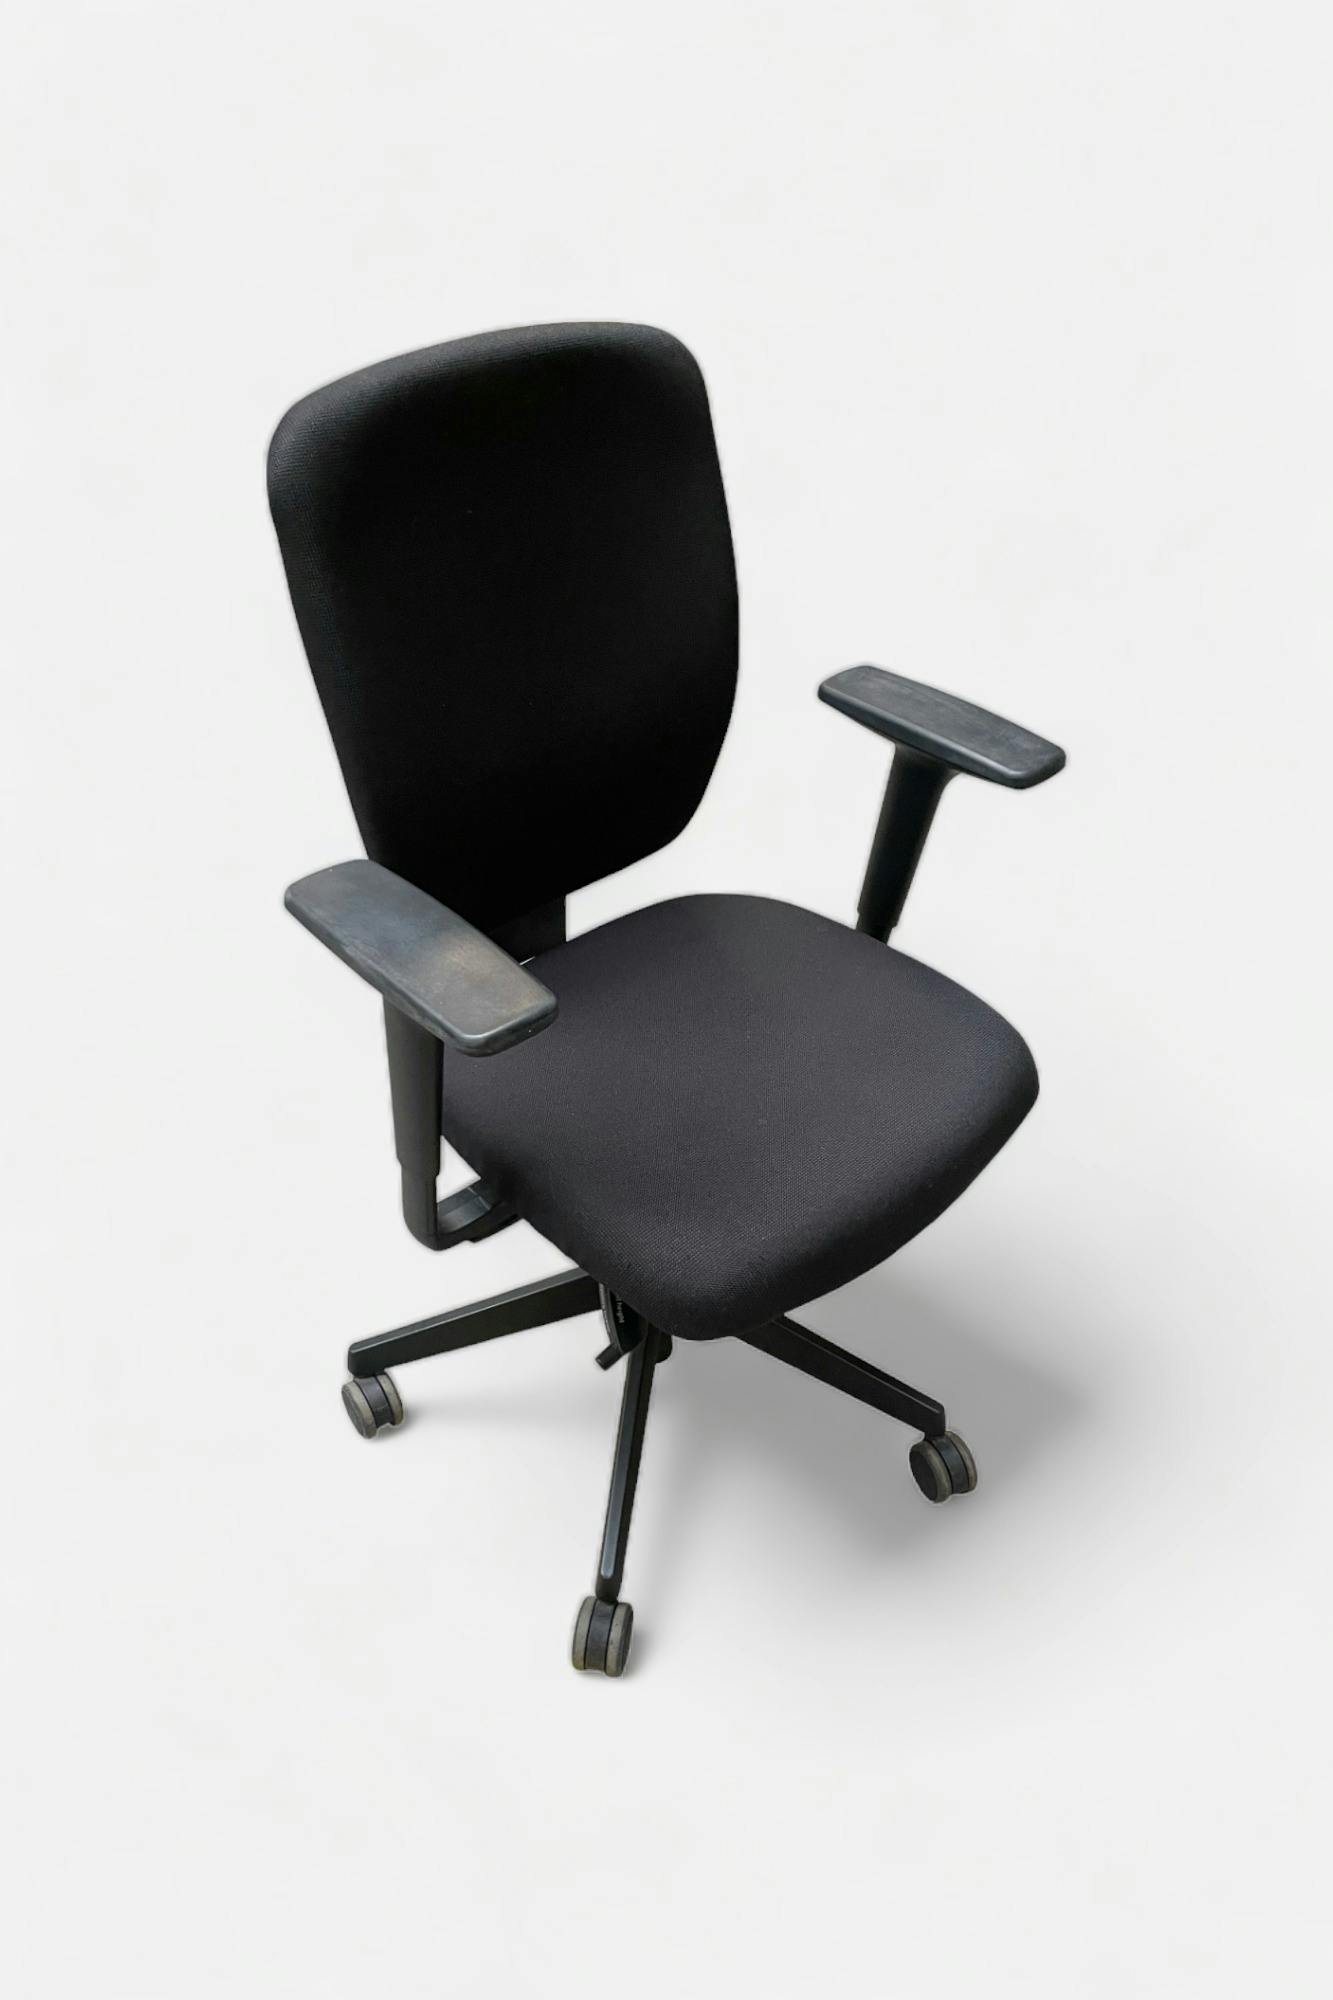 Black office chair - Relieve Furniture